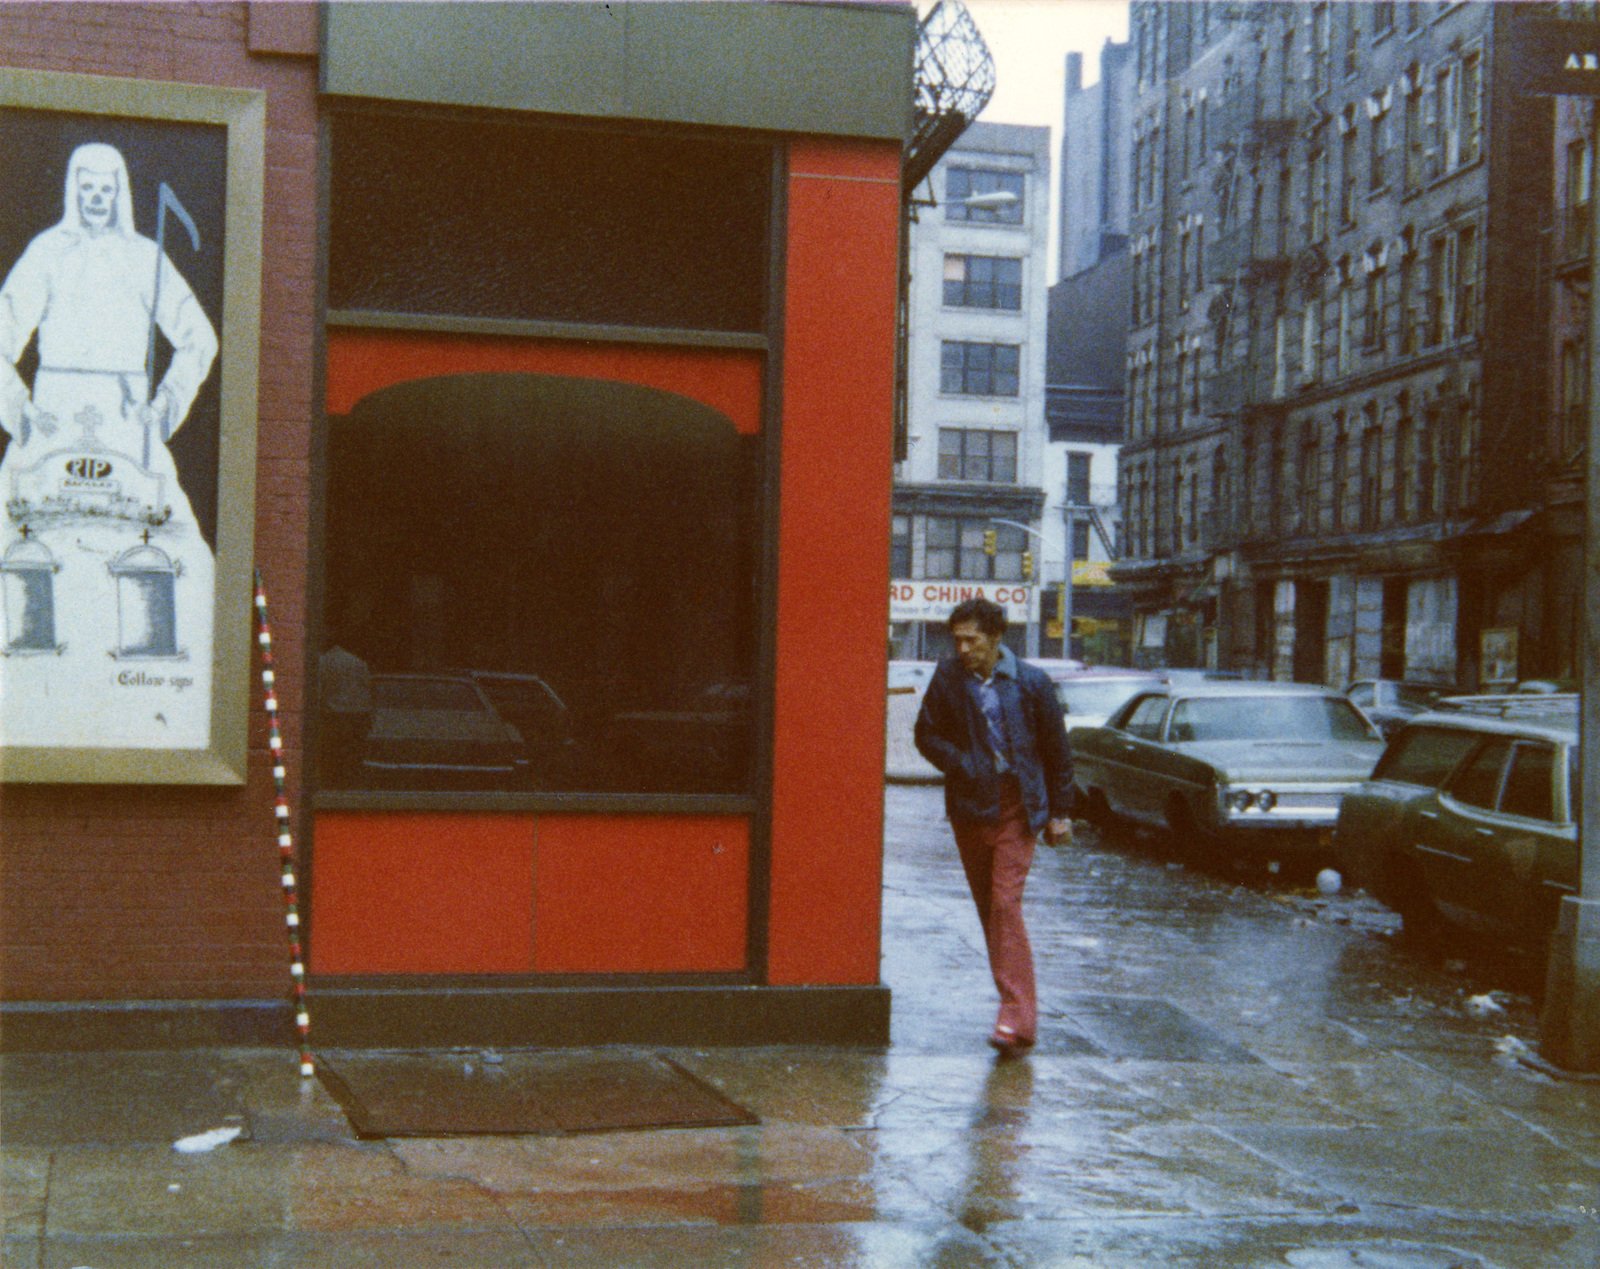 Andr&eacute; CadereChinatown, New York City, November 1975Courtesy Succession Andr&eacute; Cadere and Galerie Herv&eacute; Bize, Nancy